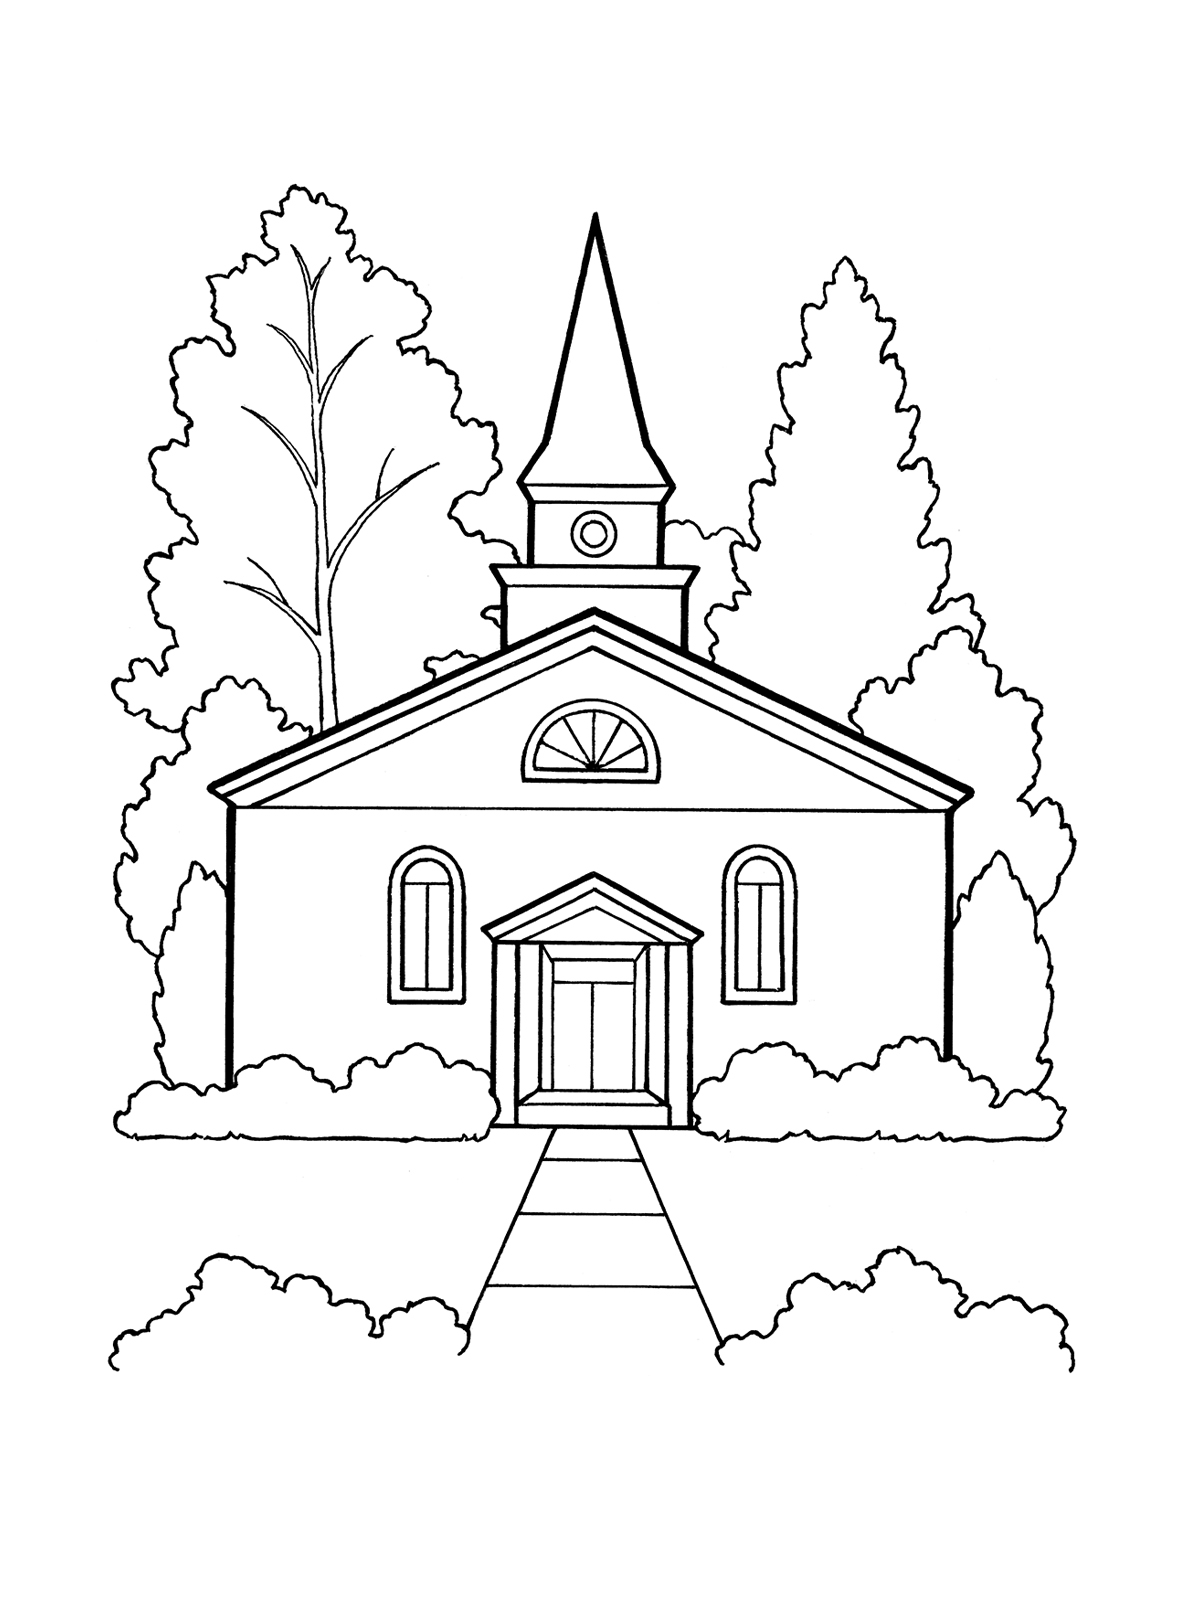 Simple Church Drawing Sketch Coloring Page | Sexiz Pix